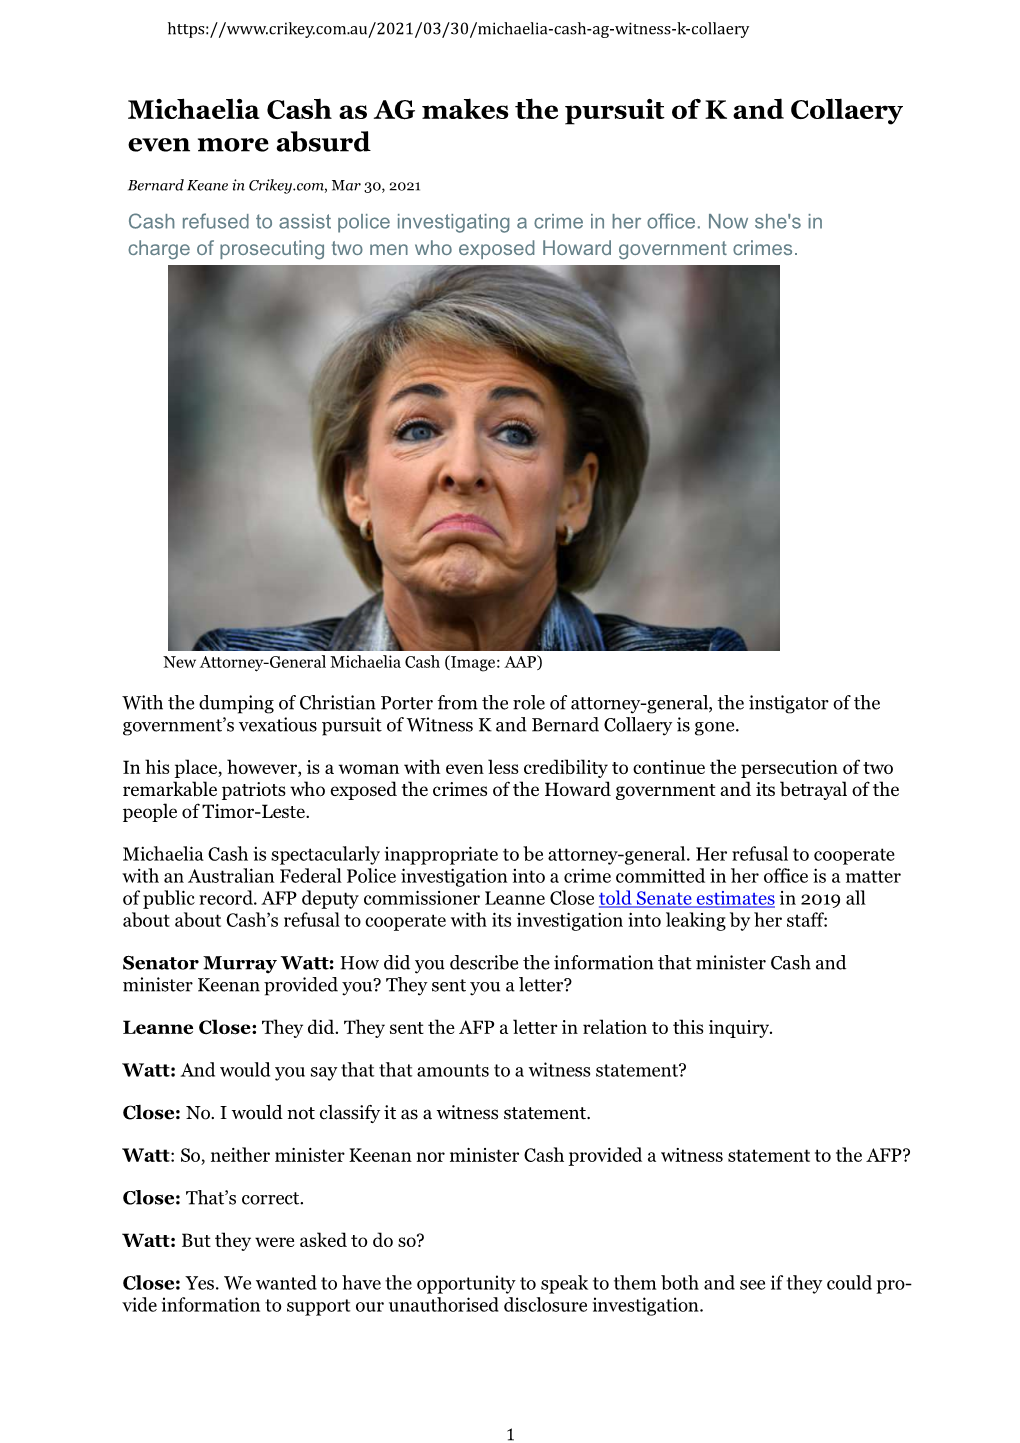 Michaelia Cash As AG Makes Pursuit of K and Collaery Even More Absurd